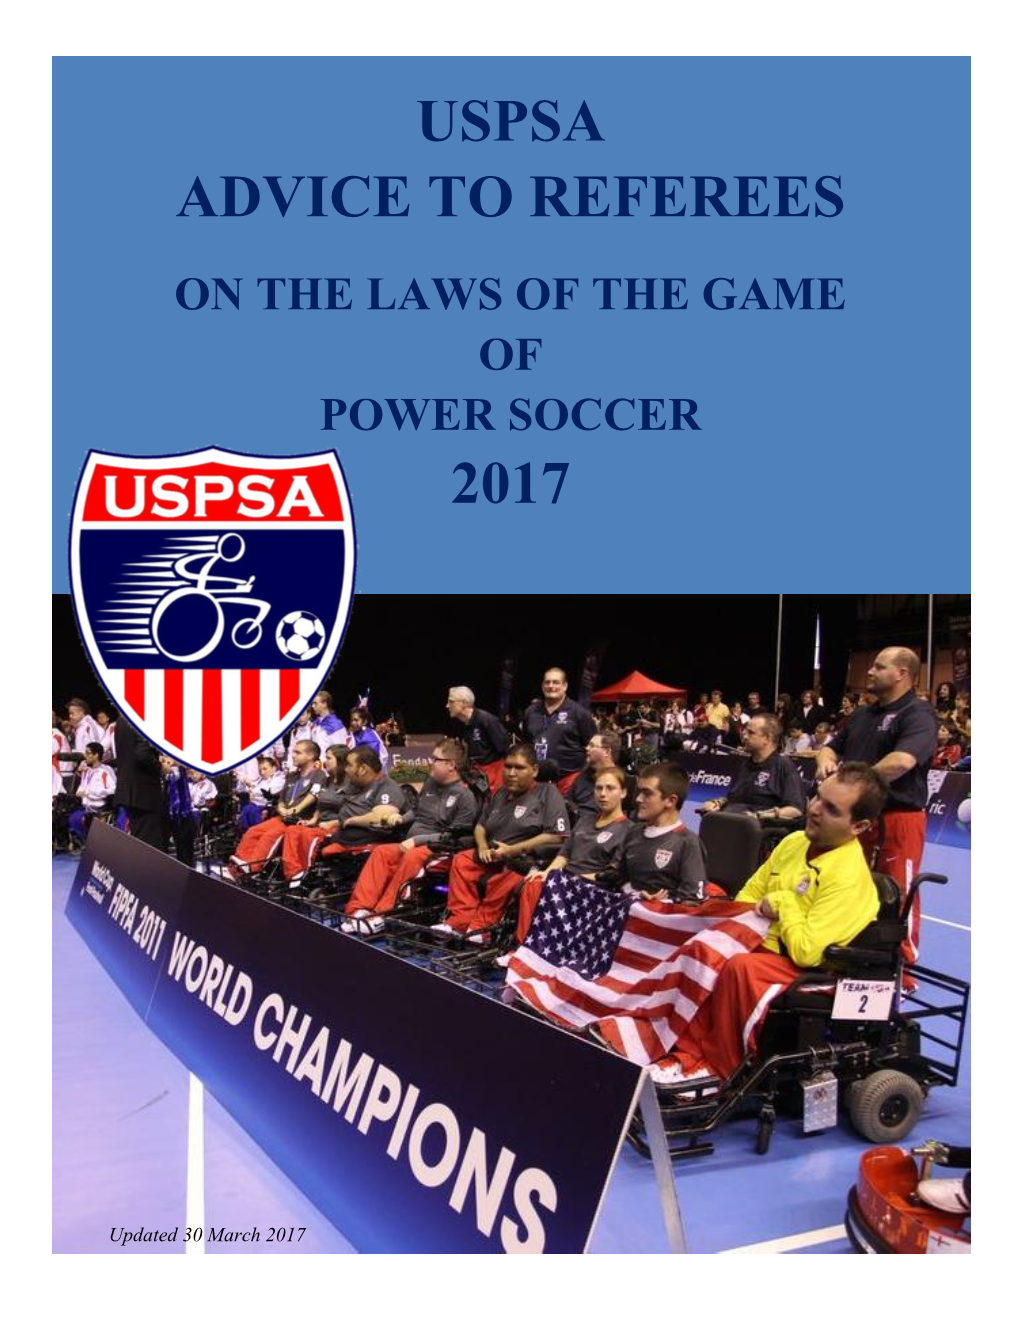 FIPFA Referee Supplement, March 2009